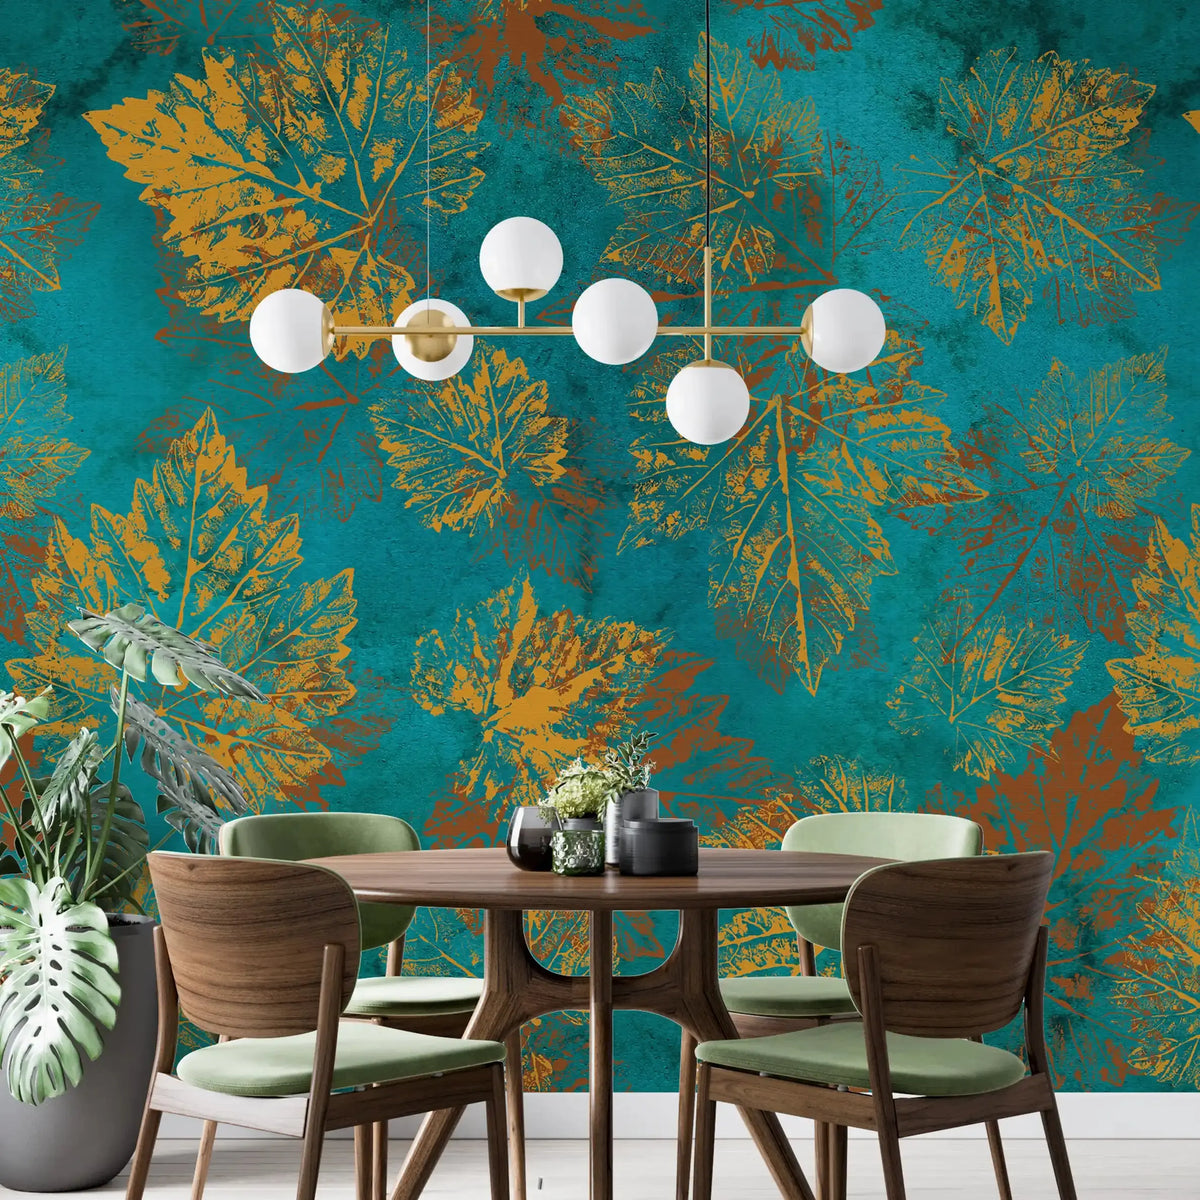 3072-D / Vintage Floral Mural Peel and Stick Wallpaper - Blue Nature-Inspired Wall Decor for Modern Homes - Artevella